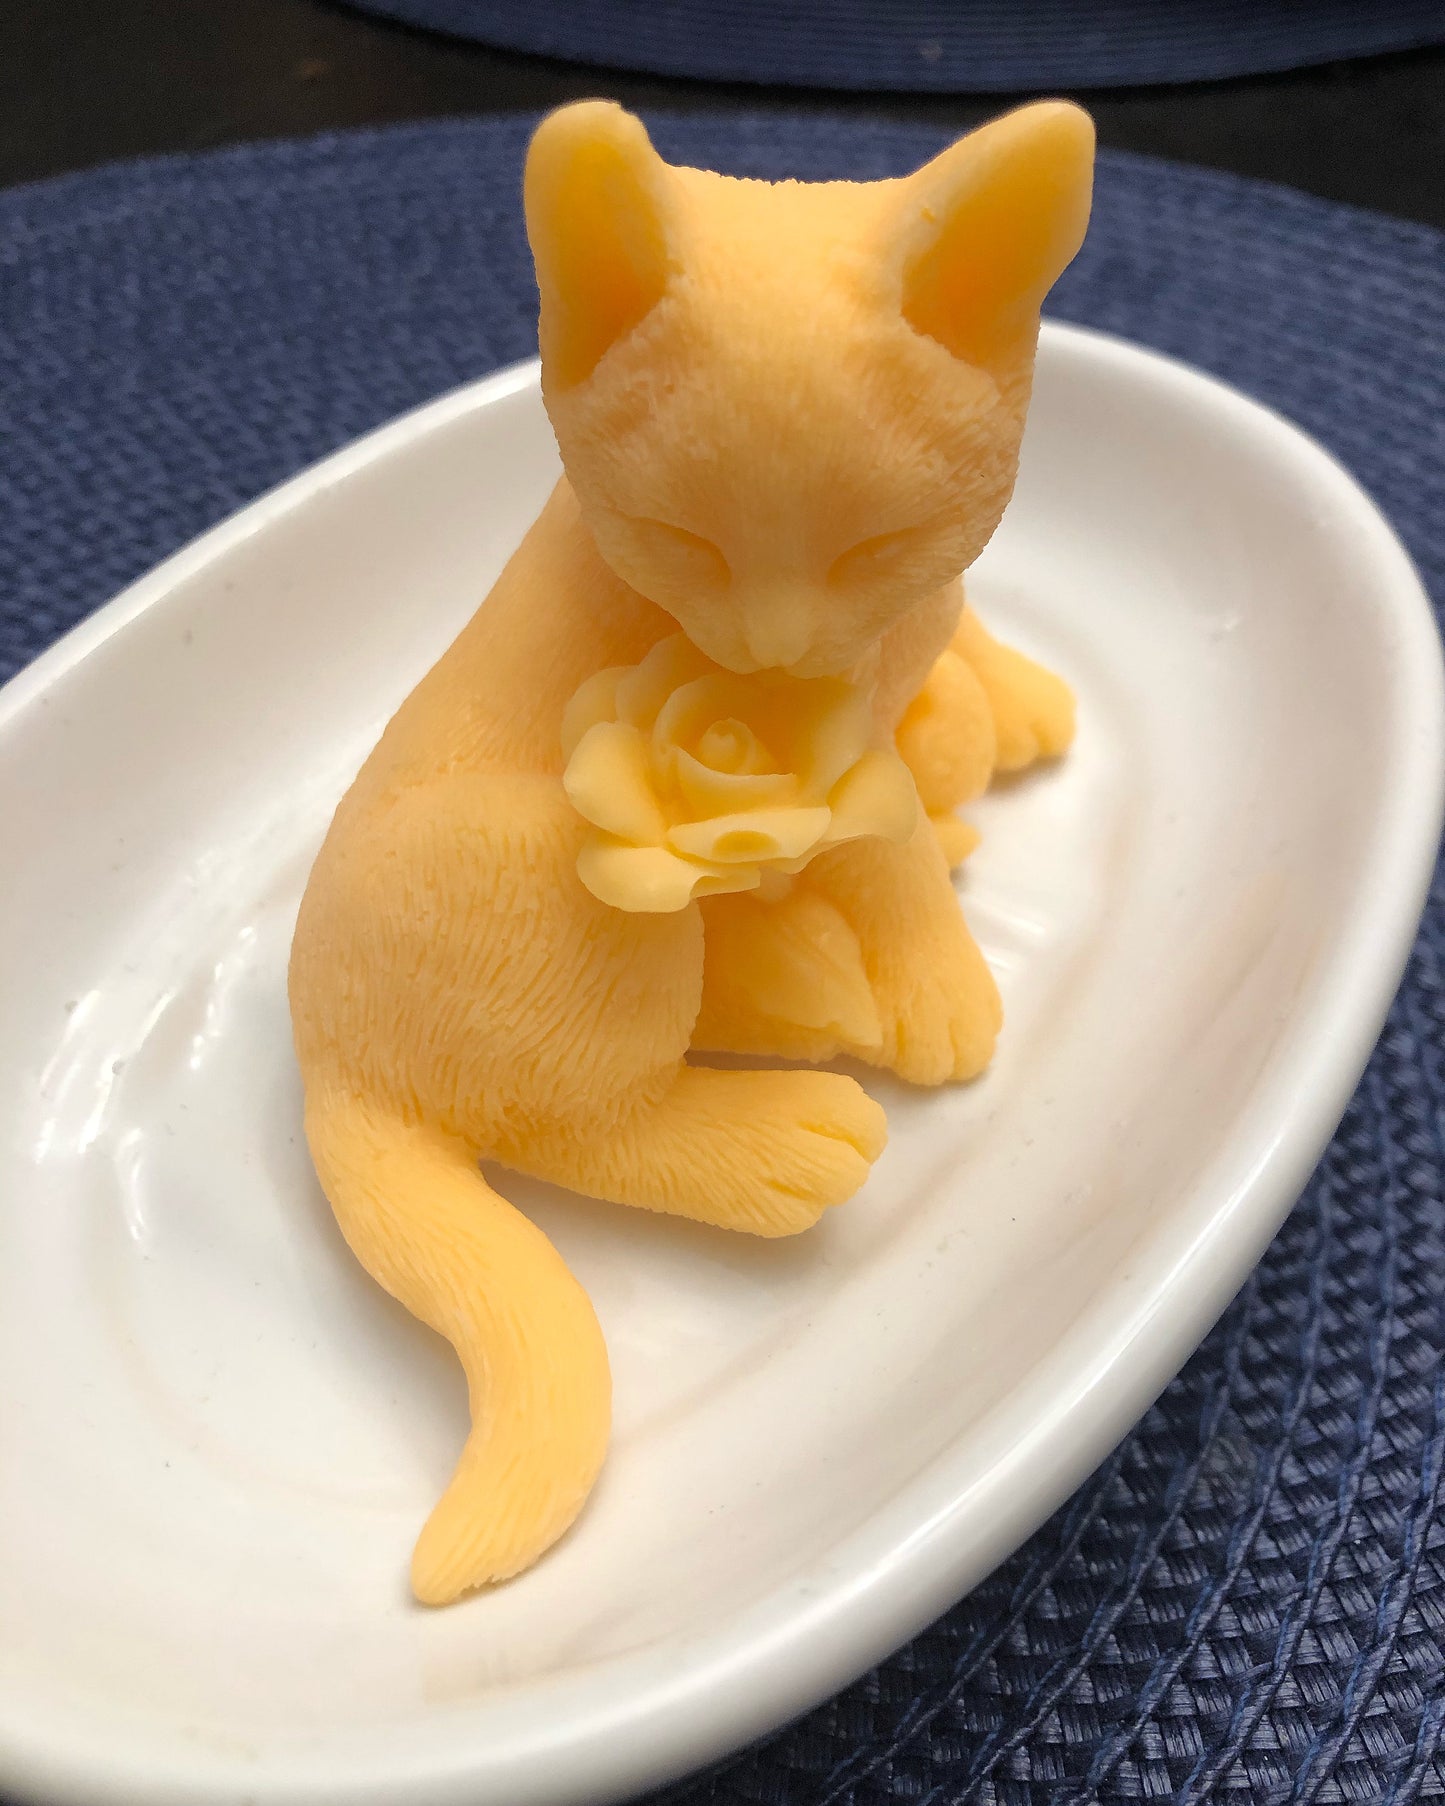 Kitty With A Rose Soap